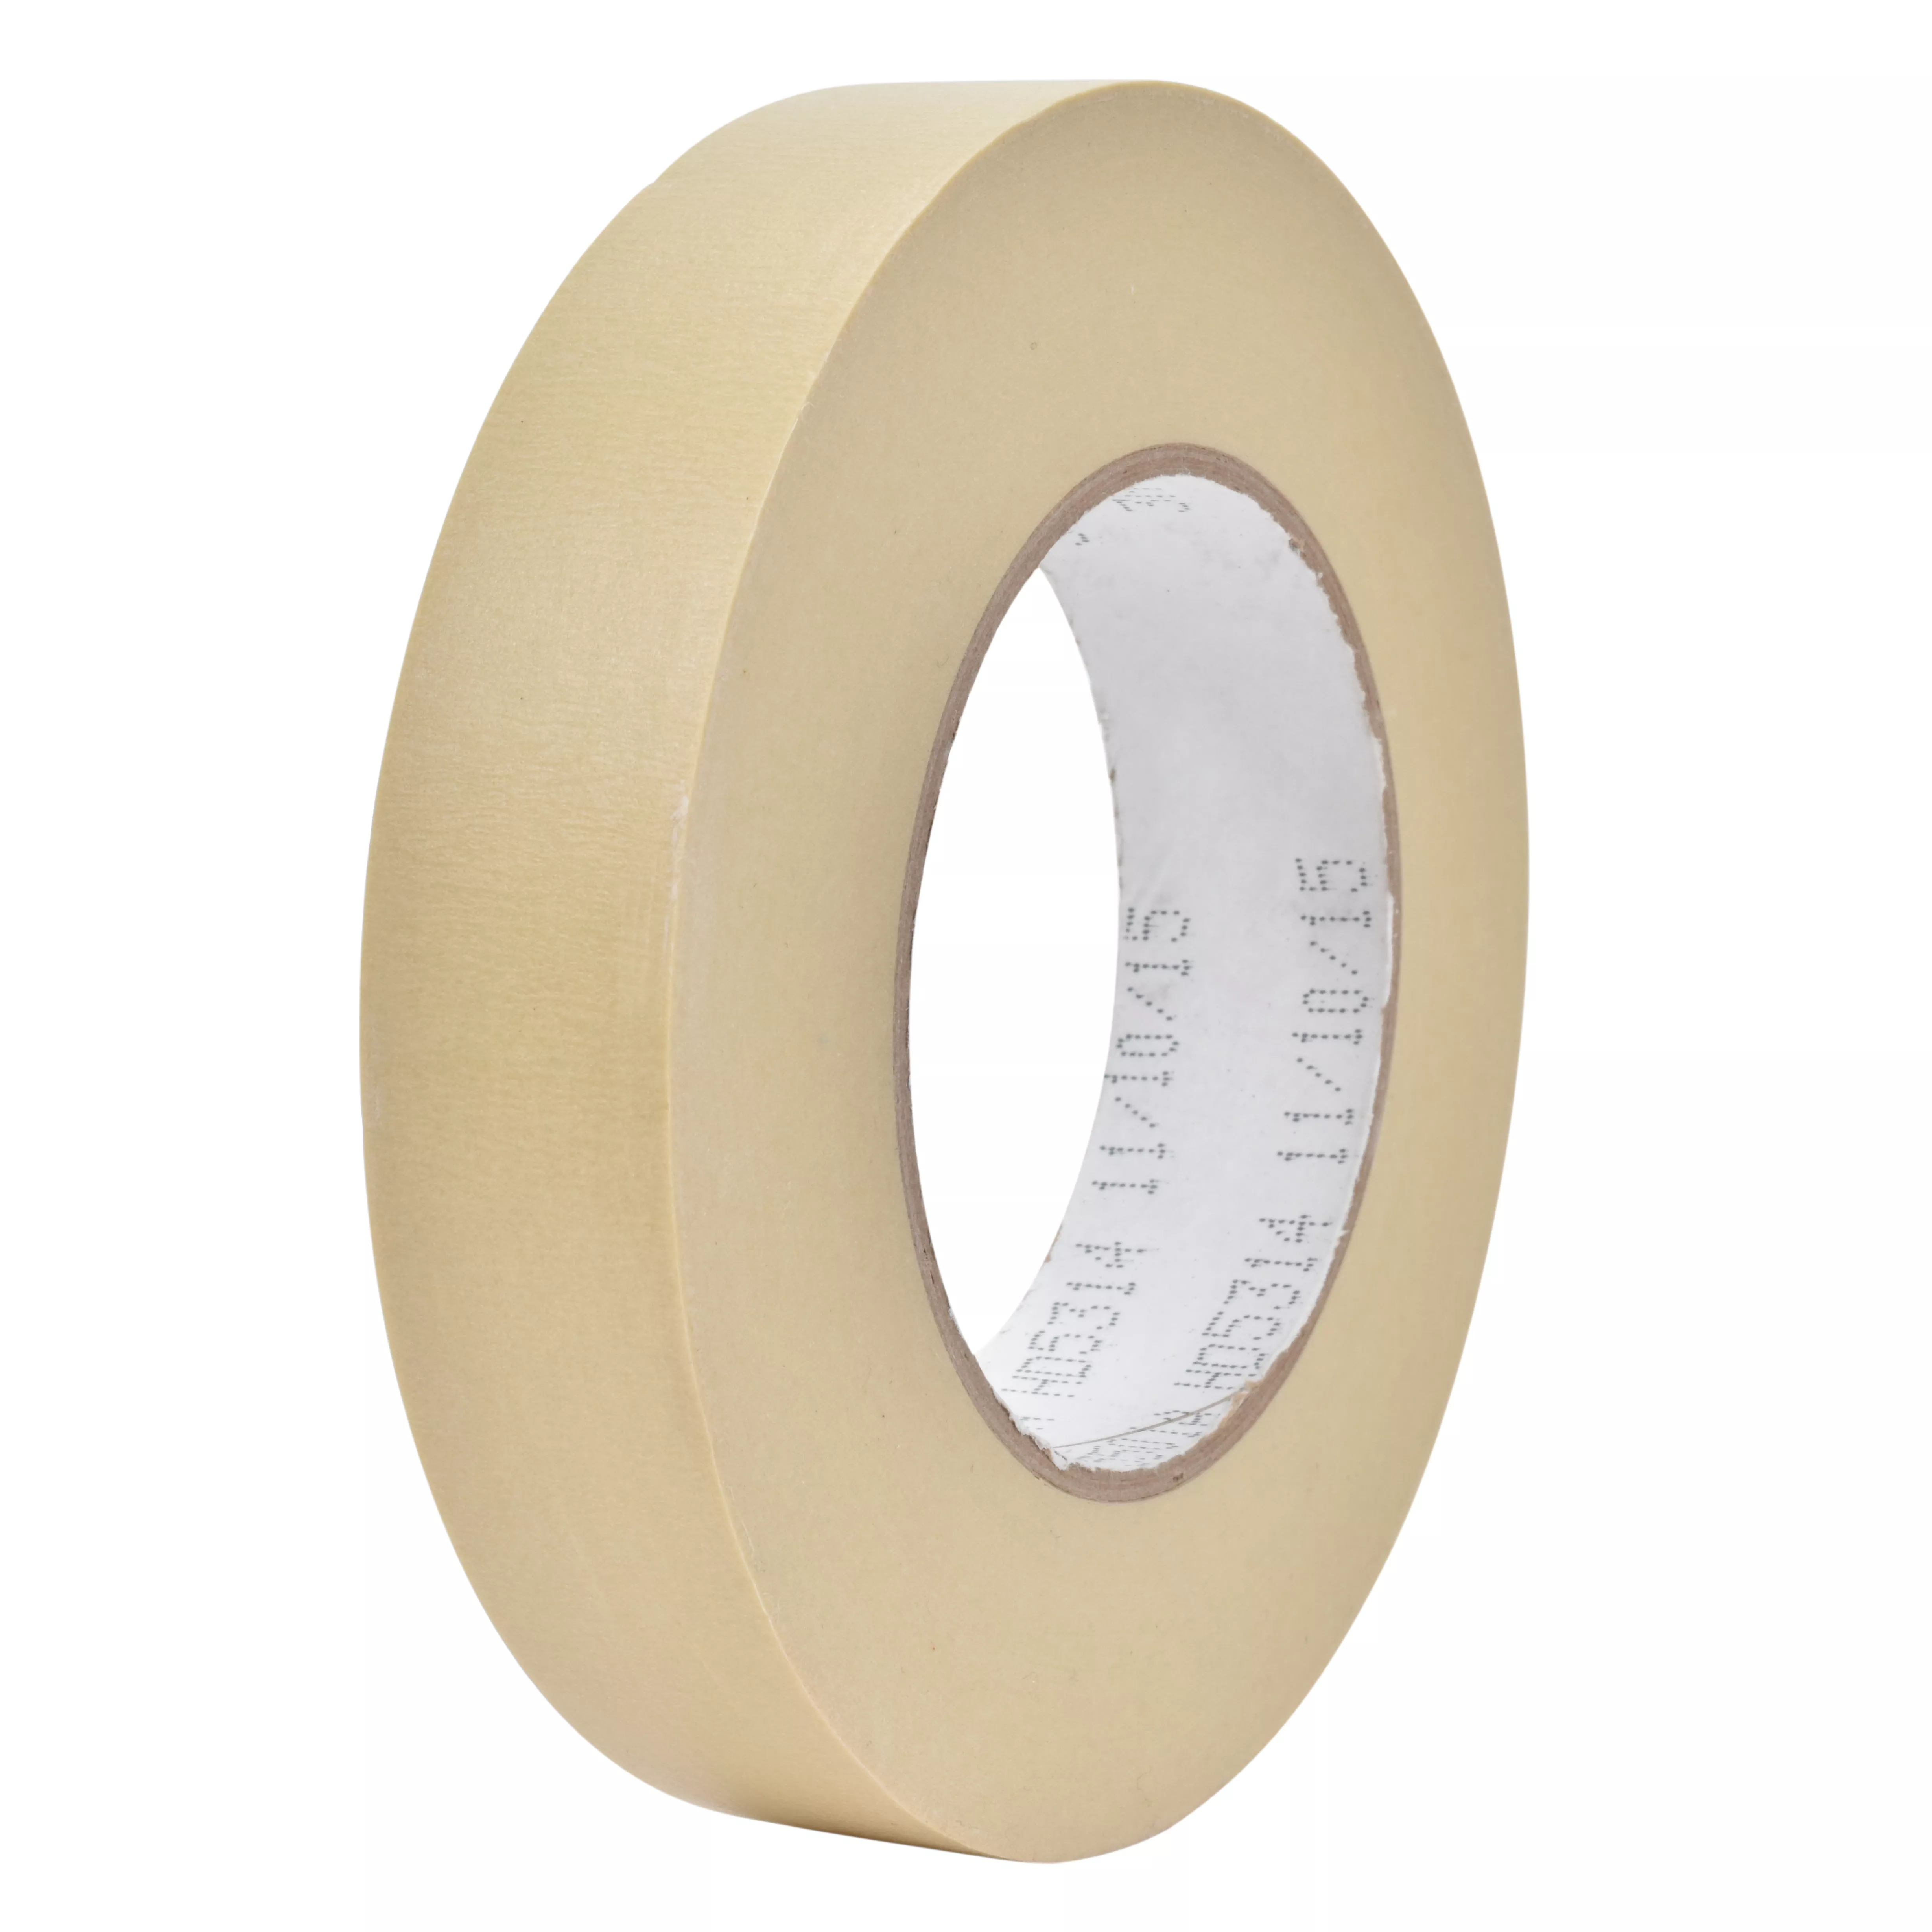 SKU 7010295793 | 3M™ Specialty High Temperature Masking Tape 5501A